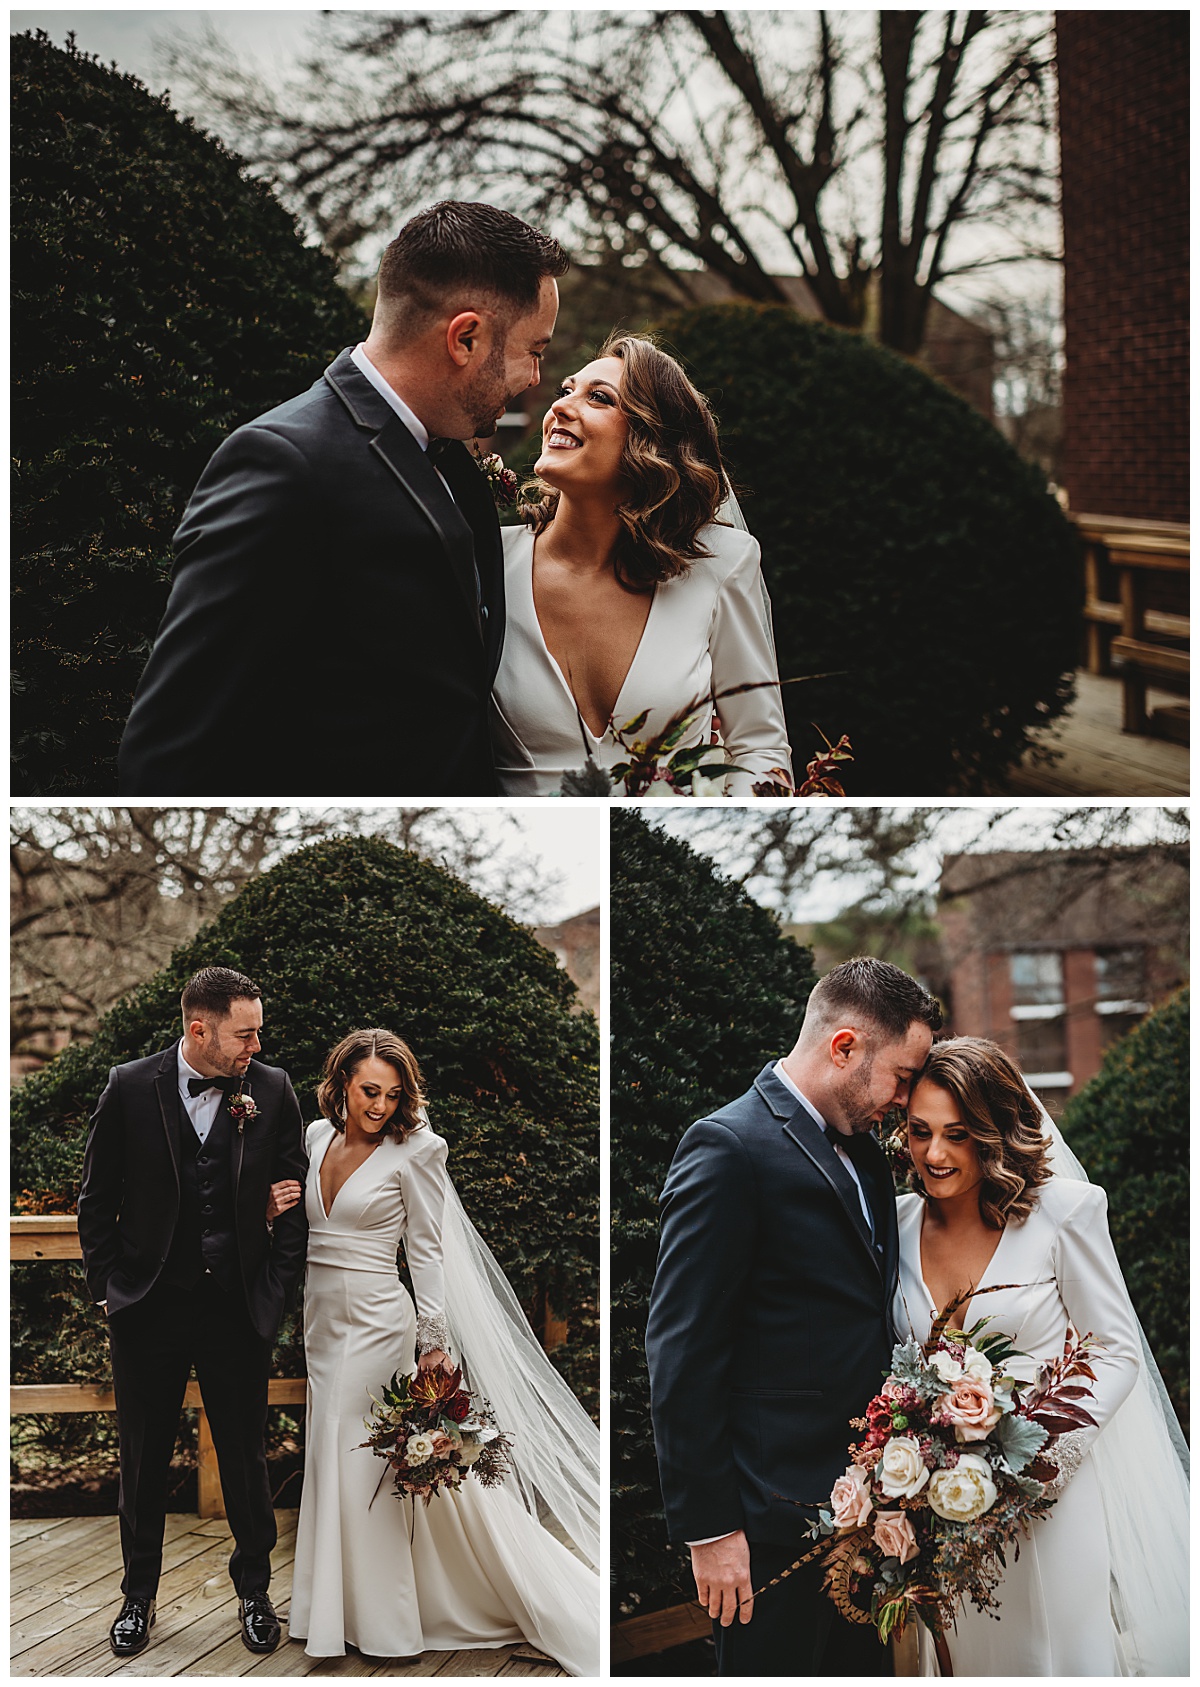 Bride and groom outdoor portraits for a moody winter wedding in Baltimore by Brittany Dunbar Photography, a Baltimore Wedding Photographer.